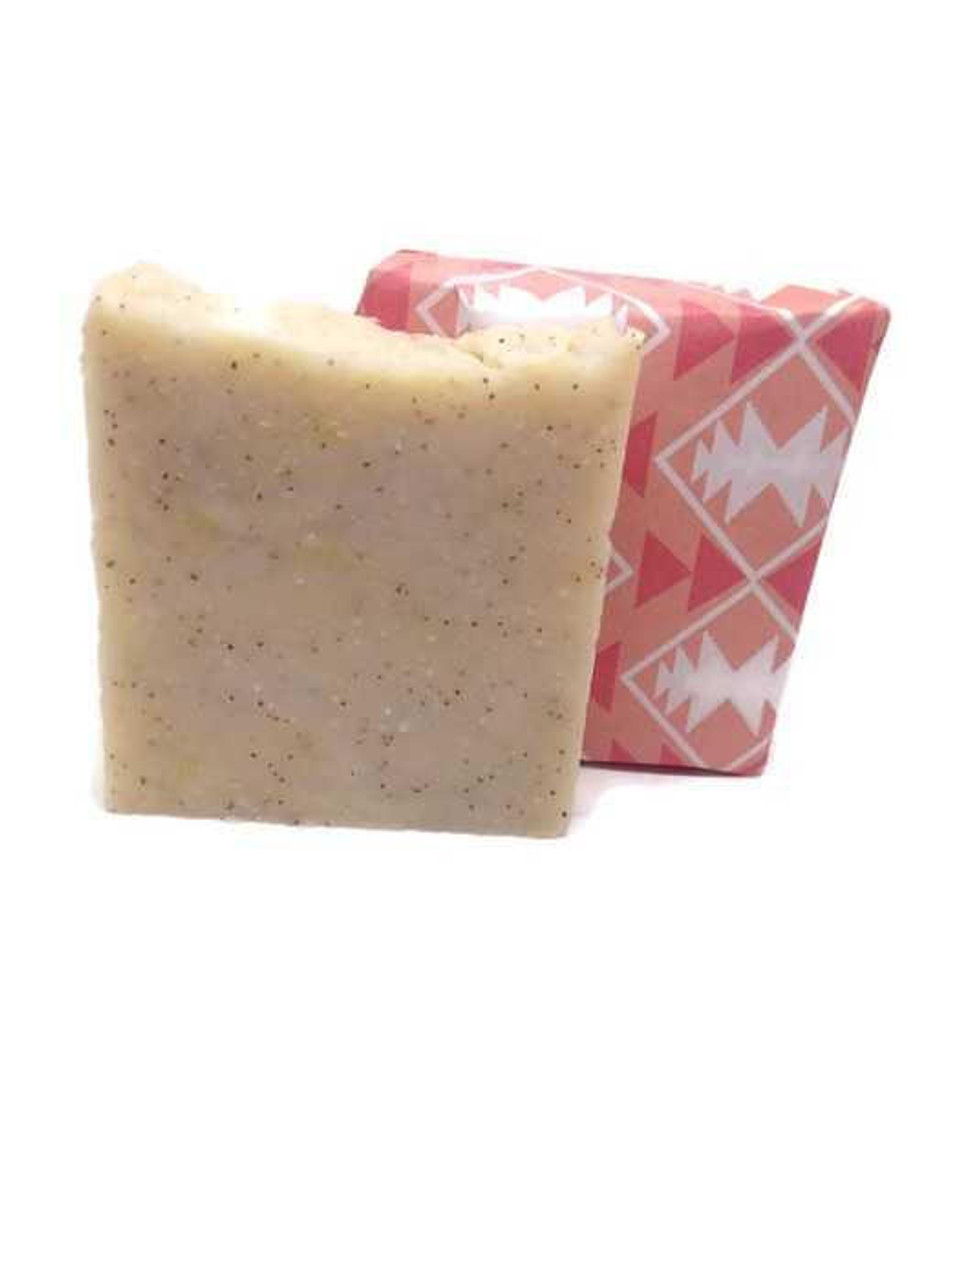 Exfoliating Facial Soap Recipe with Shea Butter – Step by Step